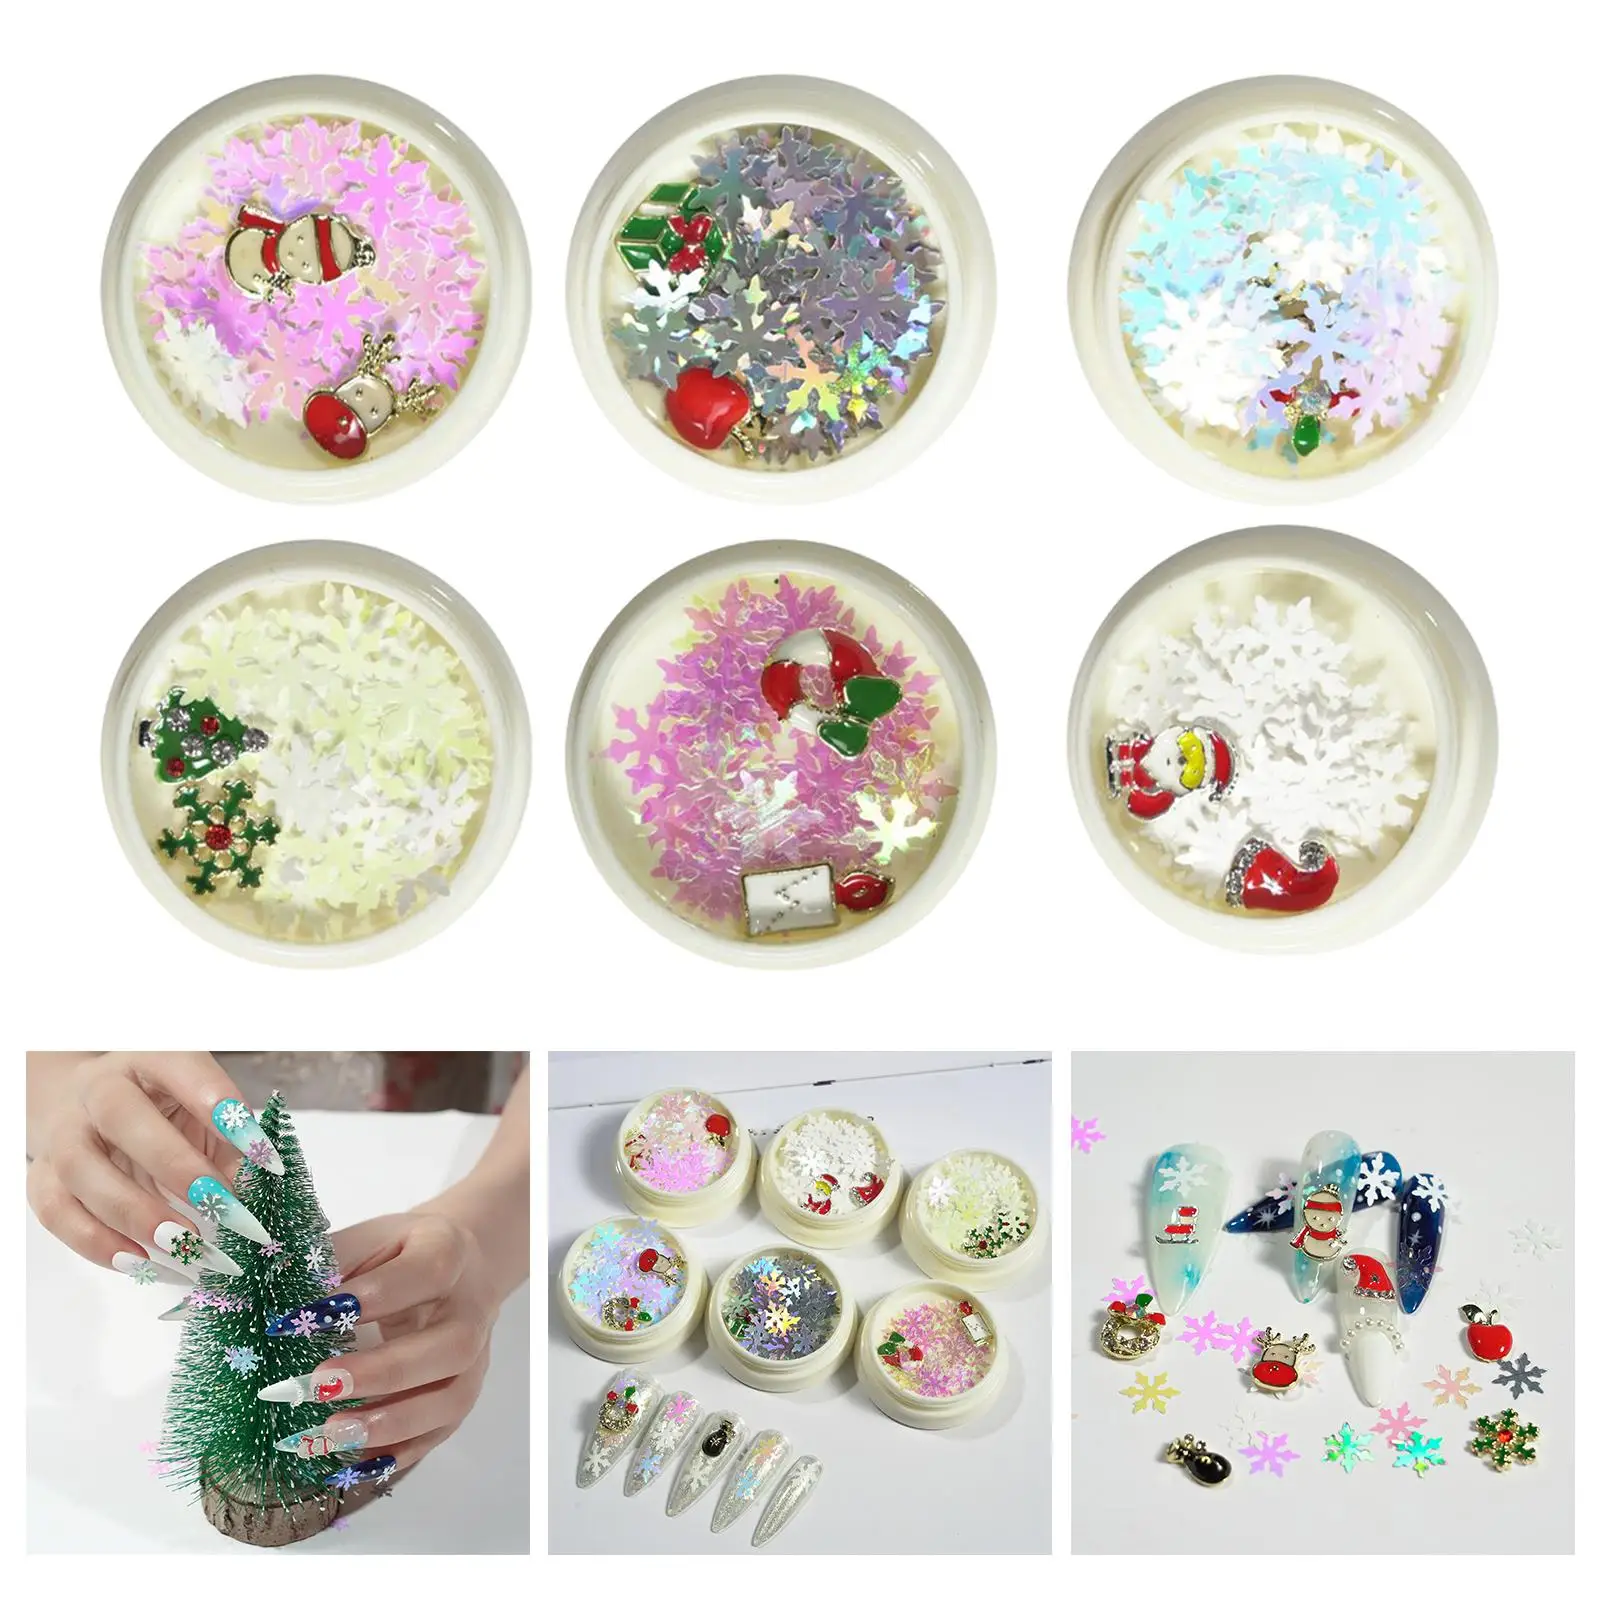 6 Colors Christmas Nail Art Glitters, Manicure Tips DIY Crafts Glitters Set 3D Nail Flakes Snowflake Sequins Salon Home Use